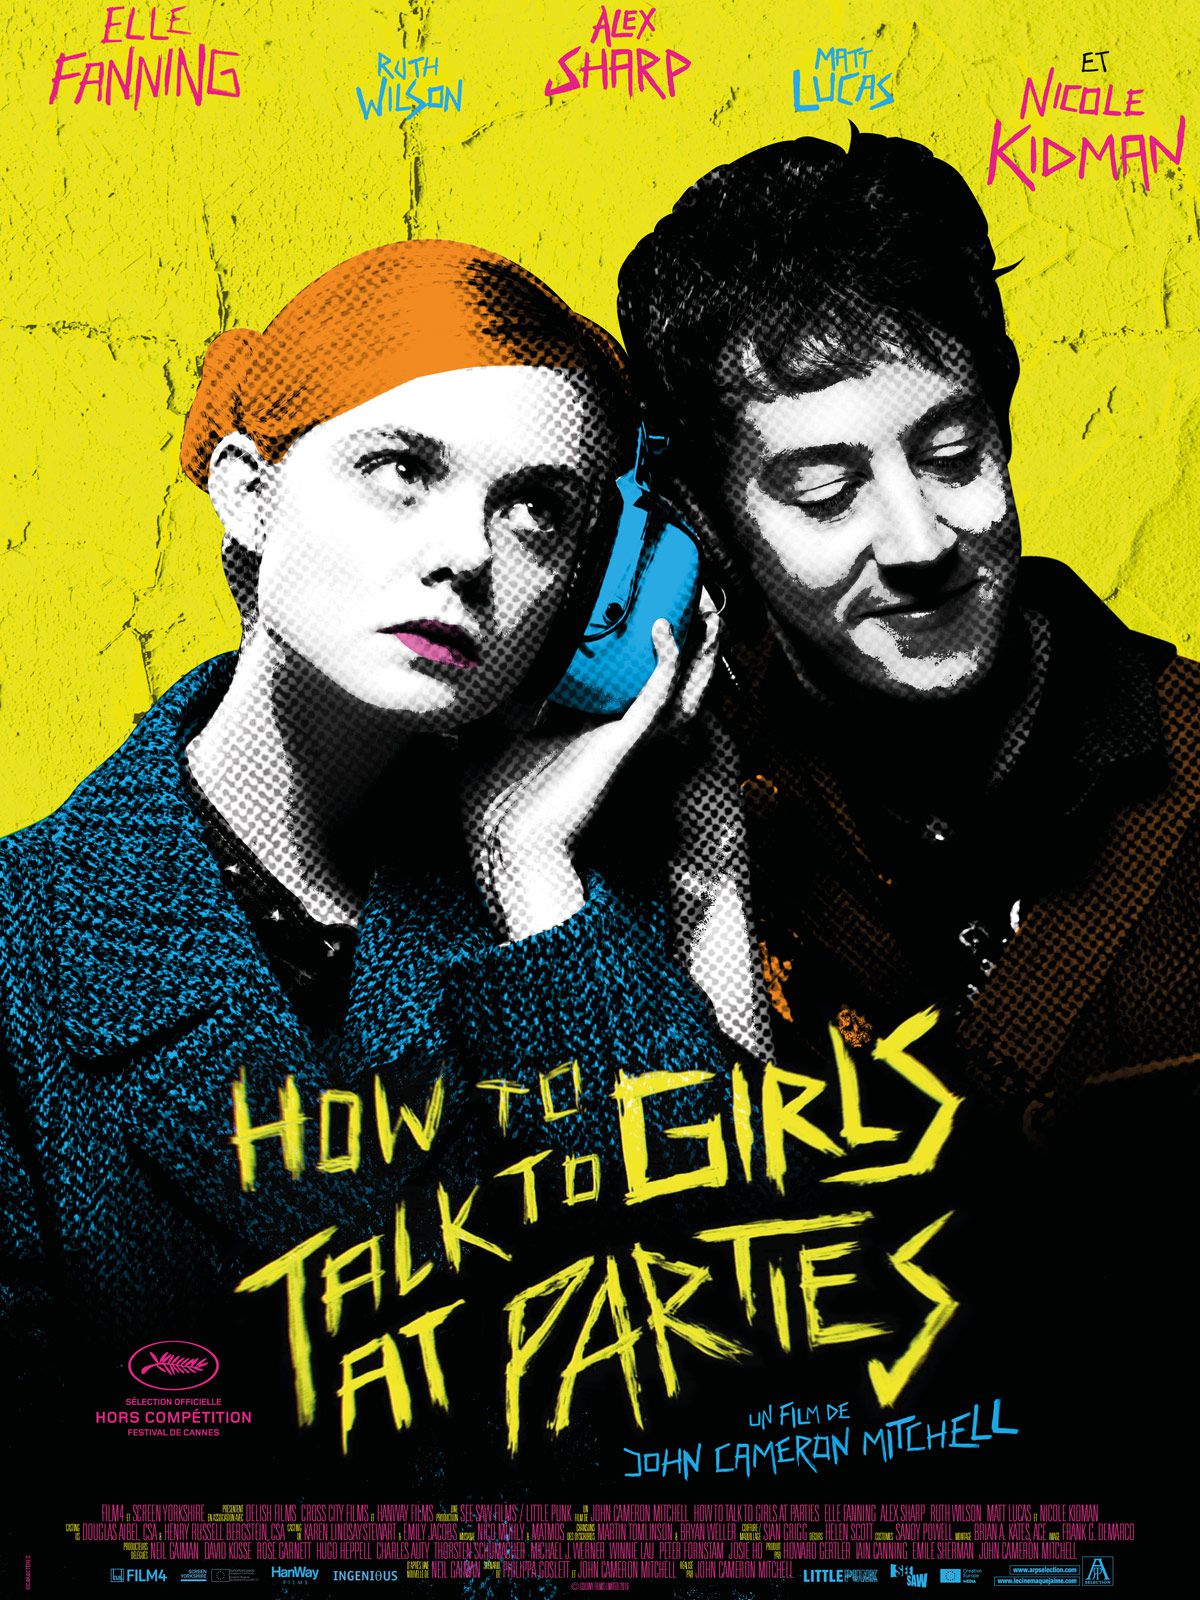 How to Talk to Girls at Parties - Film (2018) streaming VF gratuit complet